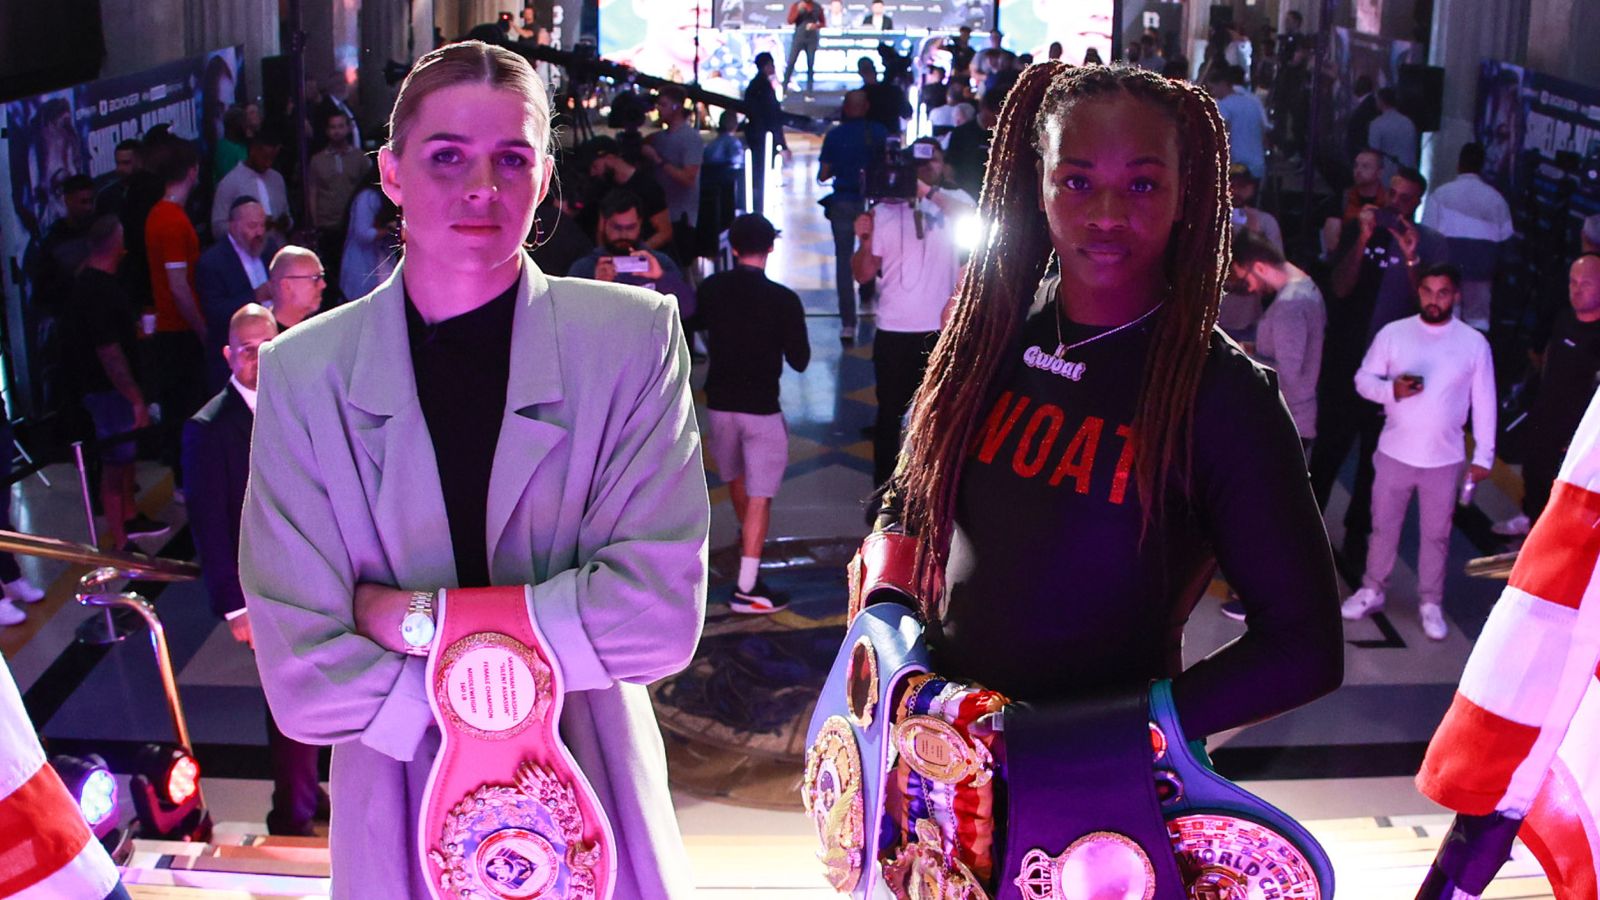 Claressa Shields vs Savannah Marshall ‘will be blood, guts and nothing else’, predicts trainer Peter Fury